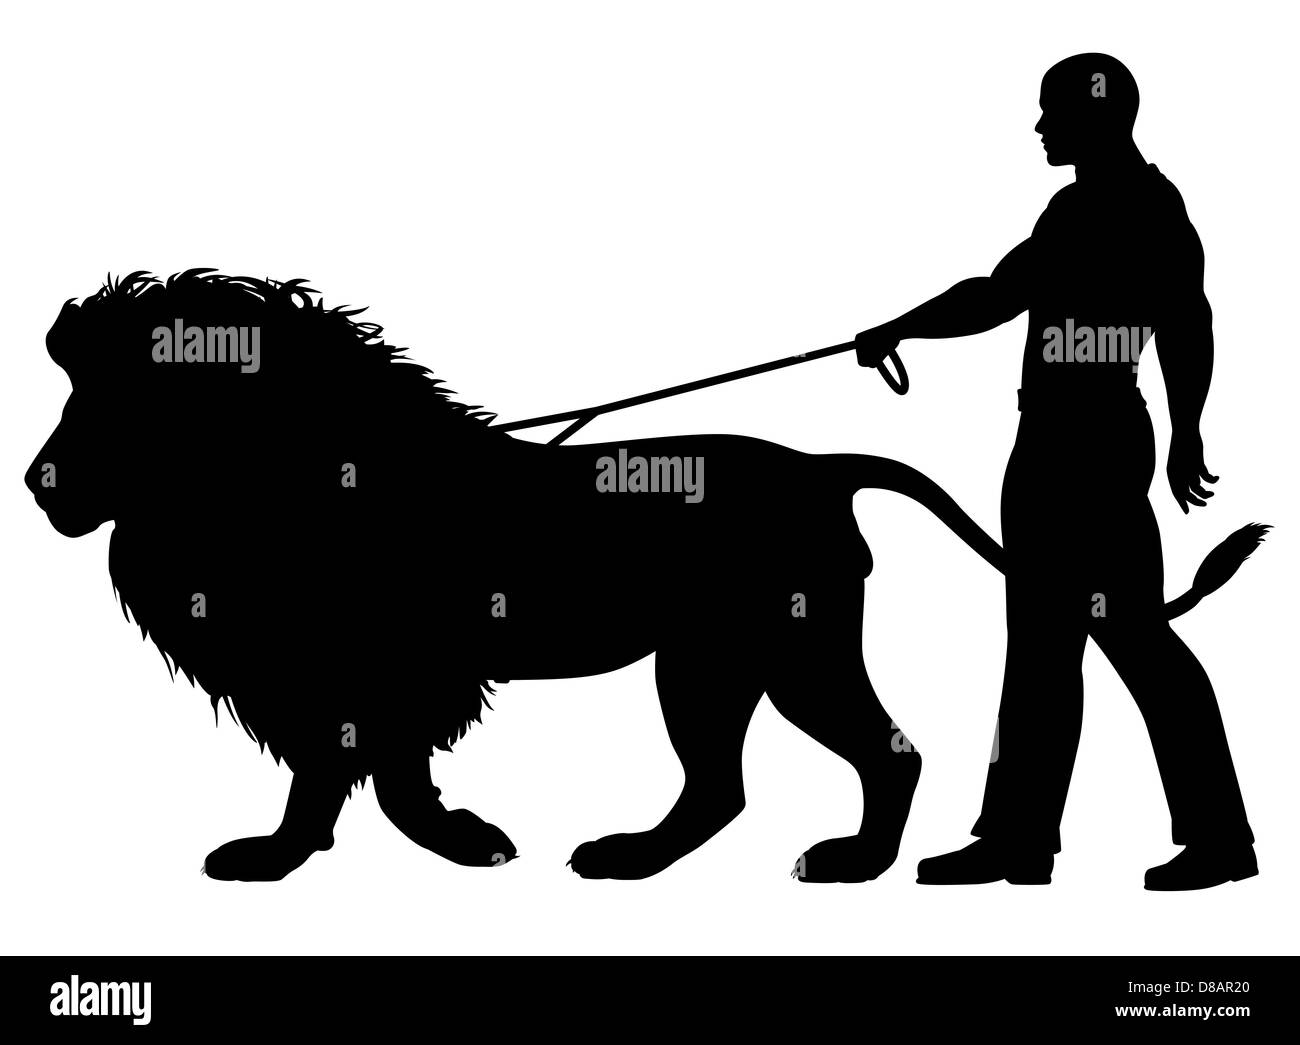 Illustrated silhouette of a man walking a lion on a leash Stock Photo